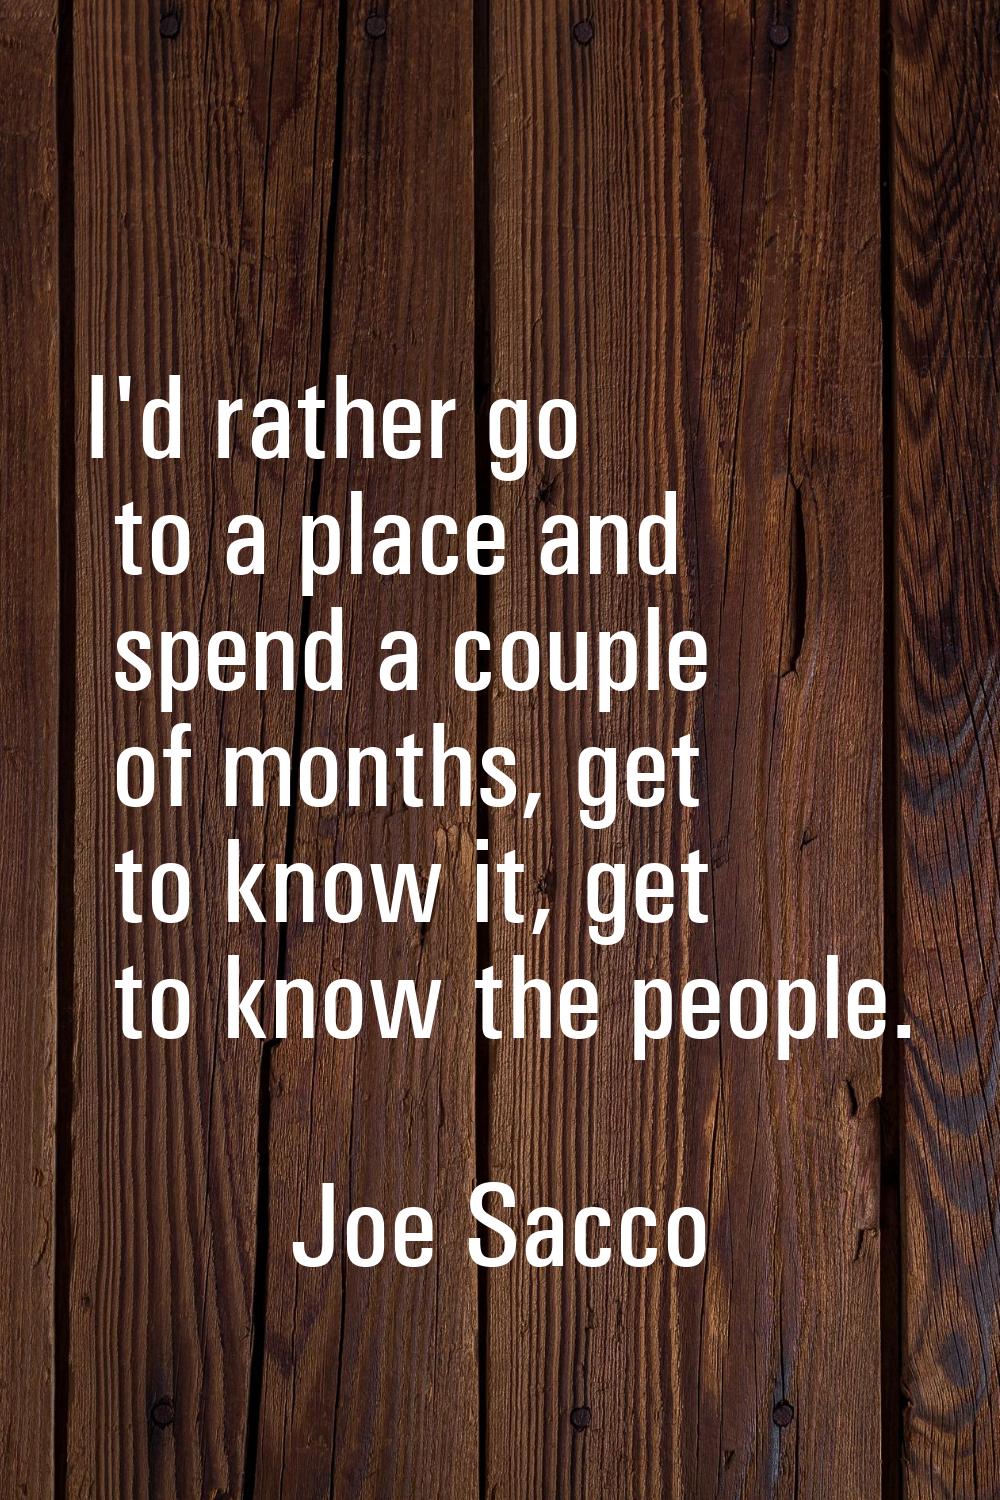 I'd rather go to a place and spend a couple of months, get to know it, get to know the people.